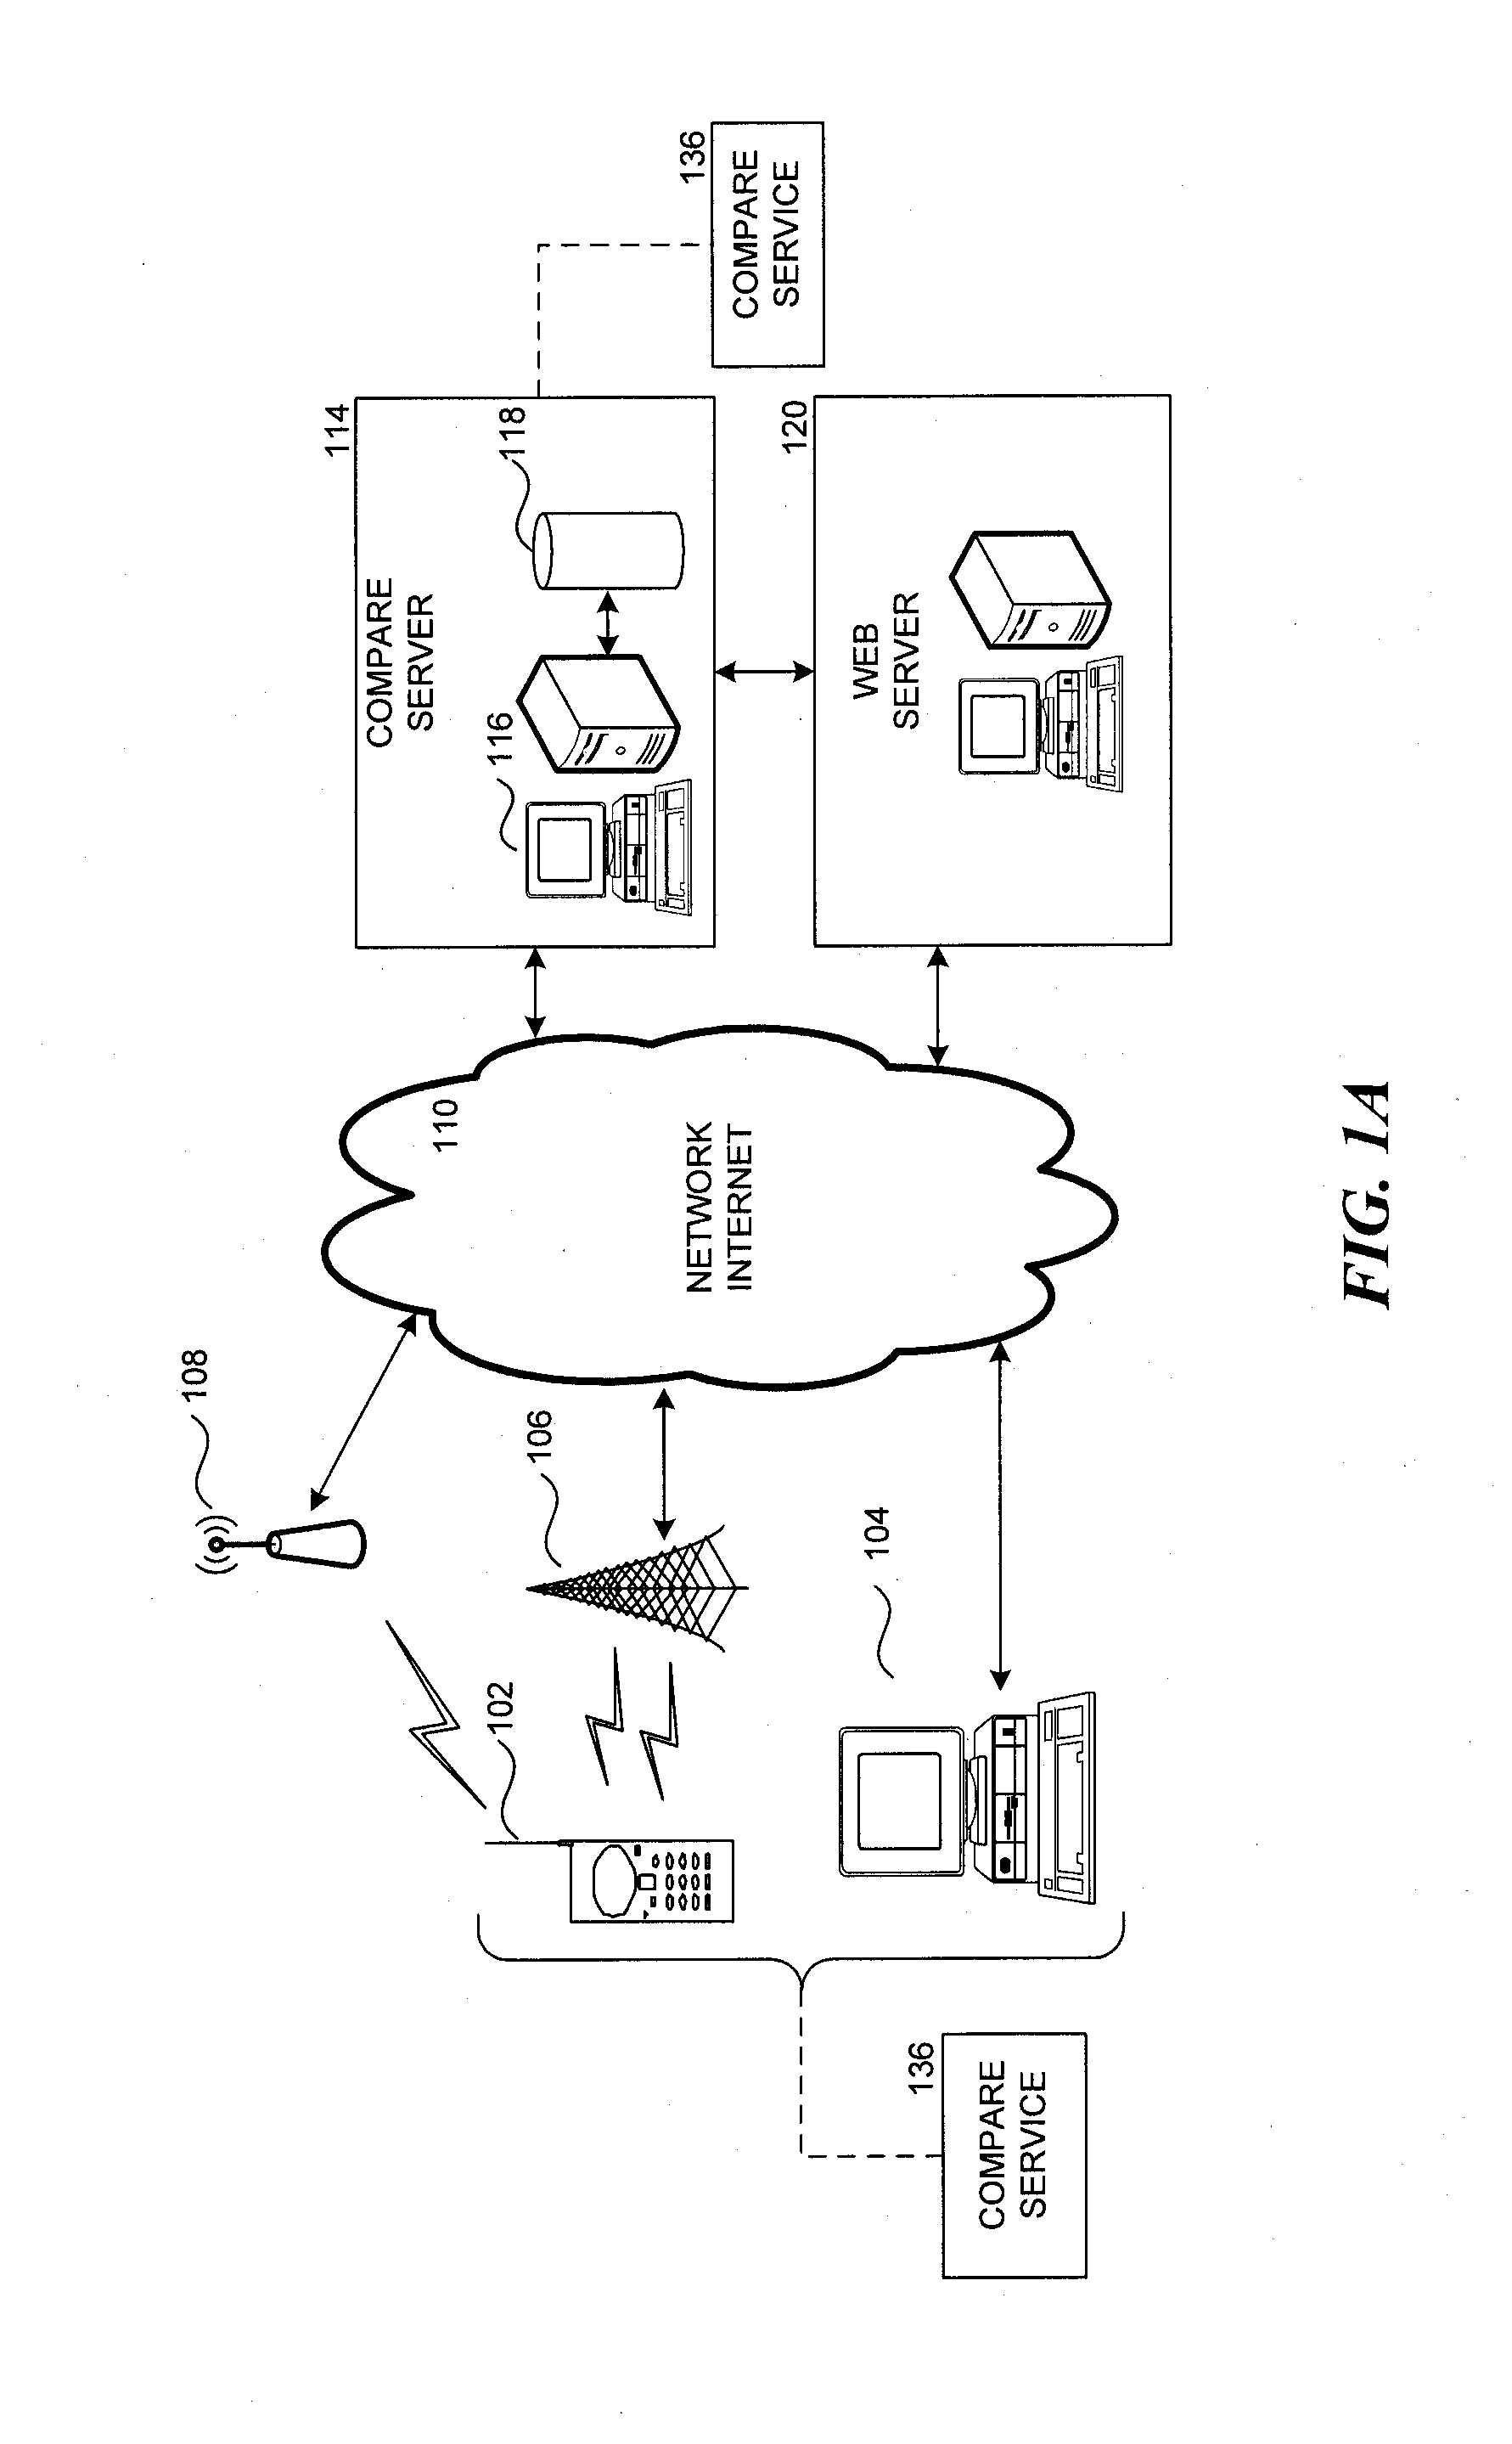 Methods and systems for monitoring documents exchanged over email applications